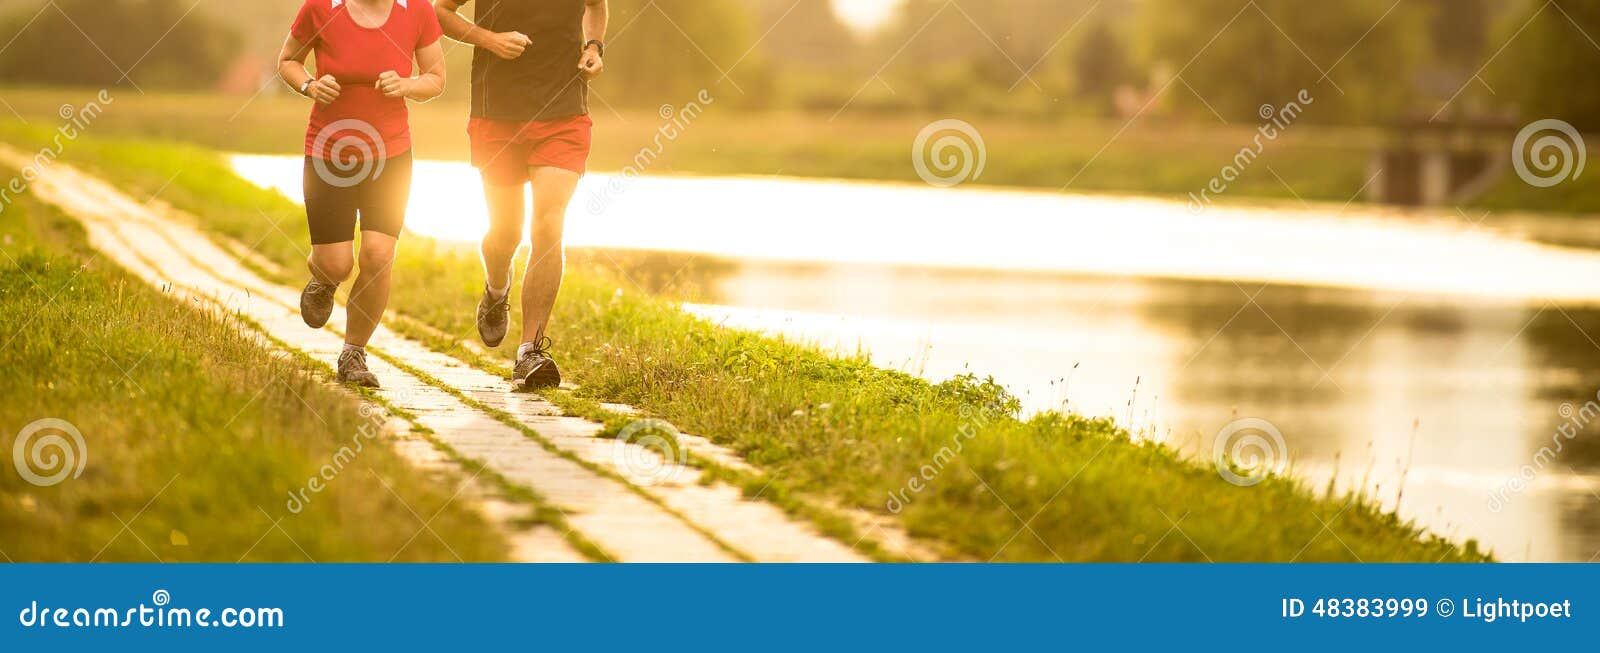 couple running outdoors, at sunset, by a river